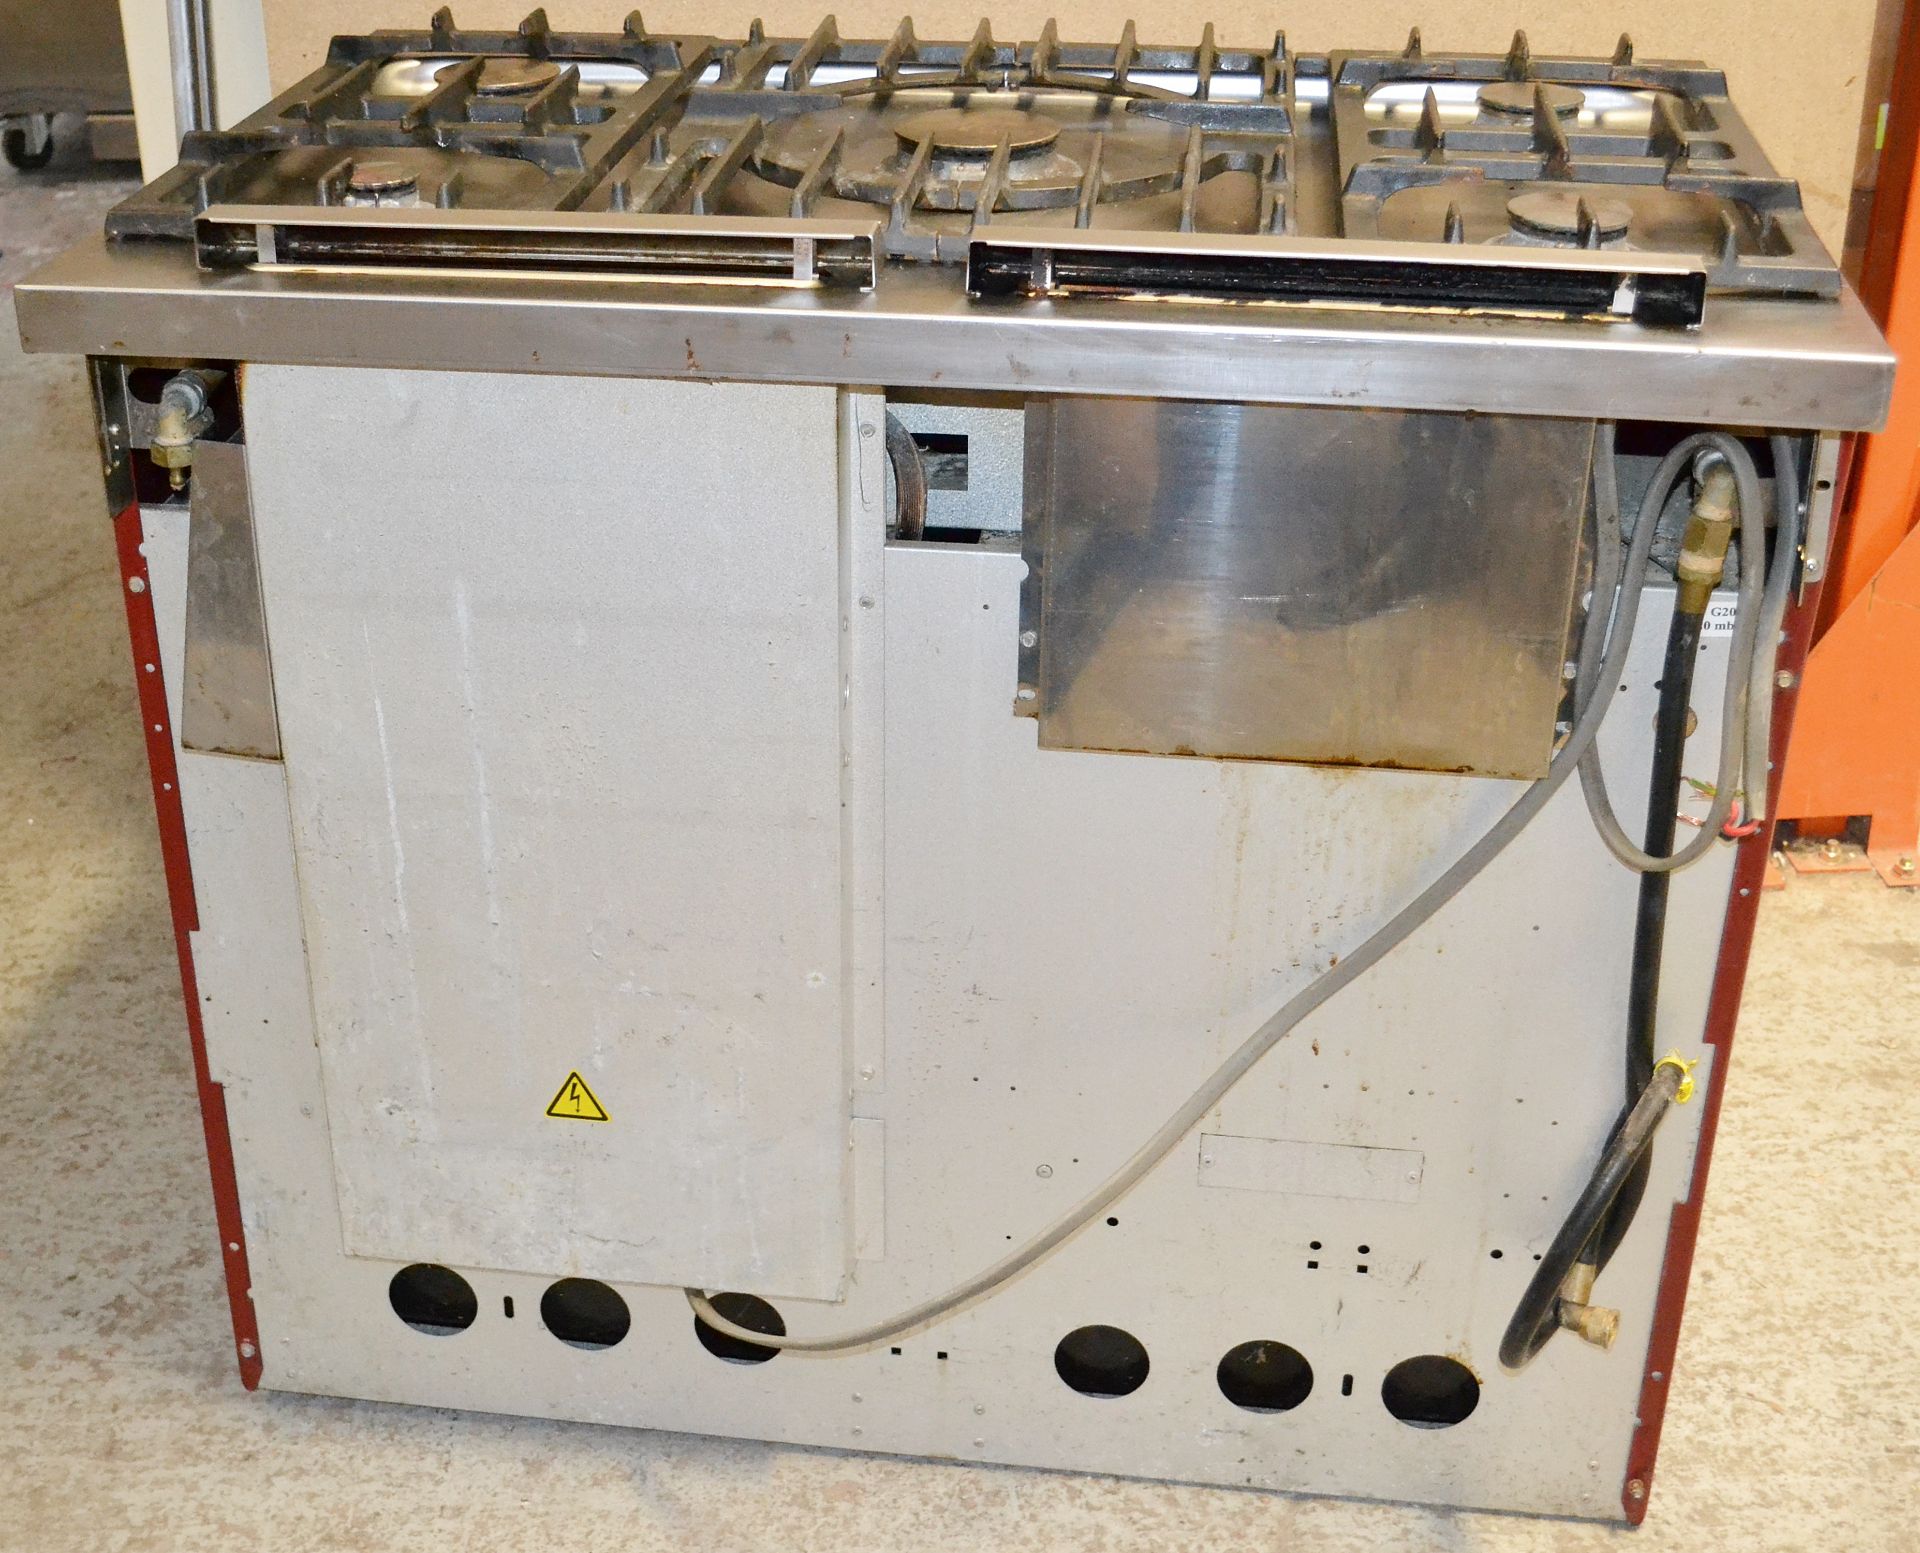 1 x Lacanche Cluny Classic 100 (Cote d'Or) Range Cooker Double Oven in Red - Dual Fuel - Used - - Image 3 of 21